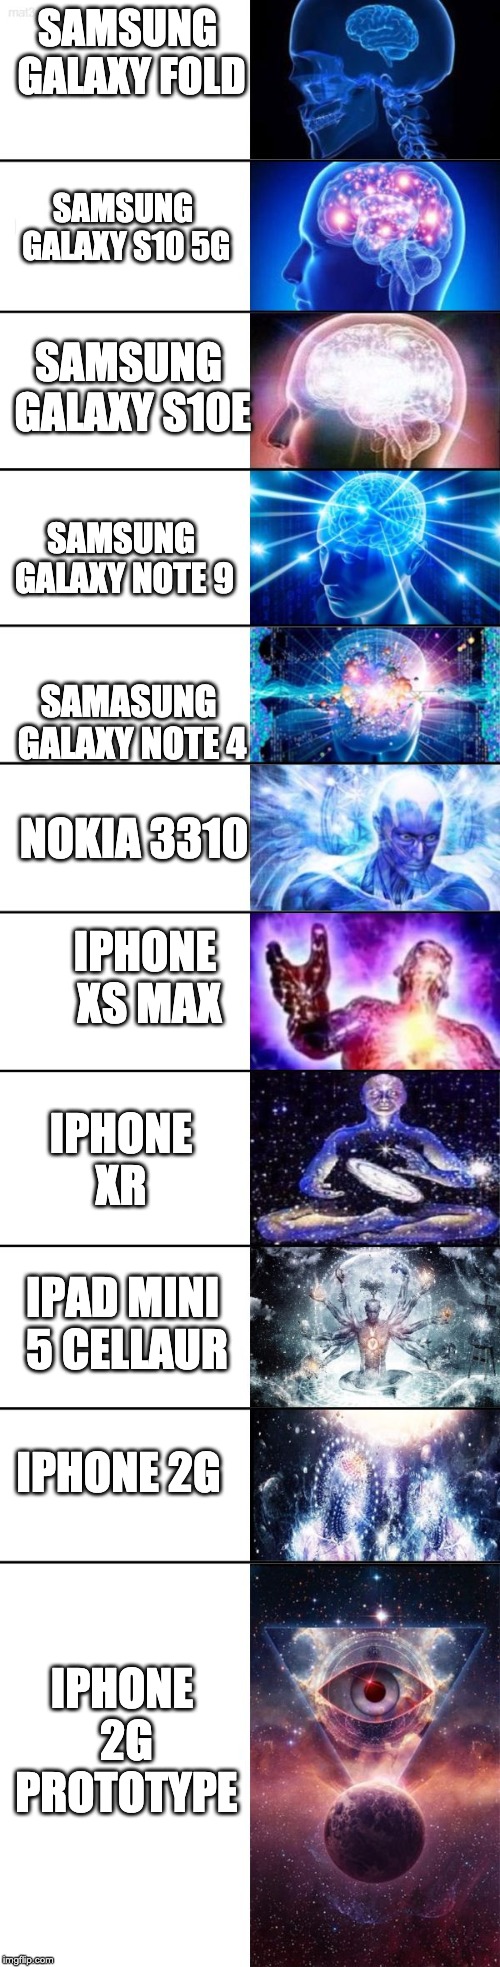 Extended Expanding Brain | SAMSUNG GALAXY FOLD; SAMSUNG GALAXY S10 5G; SAMSUNG GALAXY S10E; SAMSUNG GALAXY NOTE 9; SAMASUNG GALAXY NOTE 4; NOKIA 3310; IPHONE XS MAX; IPHONE XR; IPAD MINI 5 CELLAUR; IPHONE 2G; IPHONE 2G PROTOTYPE | image tagged in extended expanding brain | made w/ Imgflip meme maker